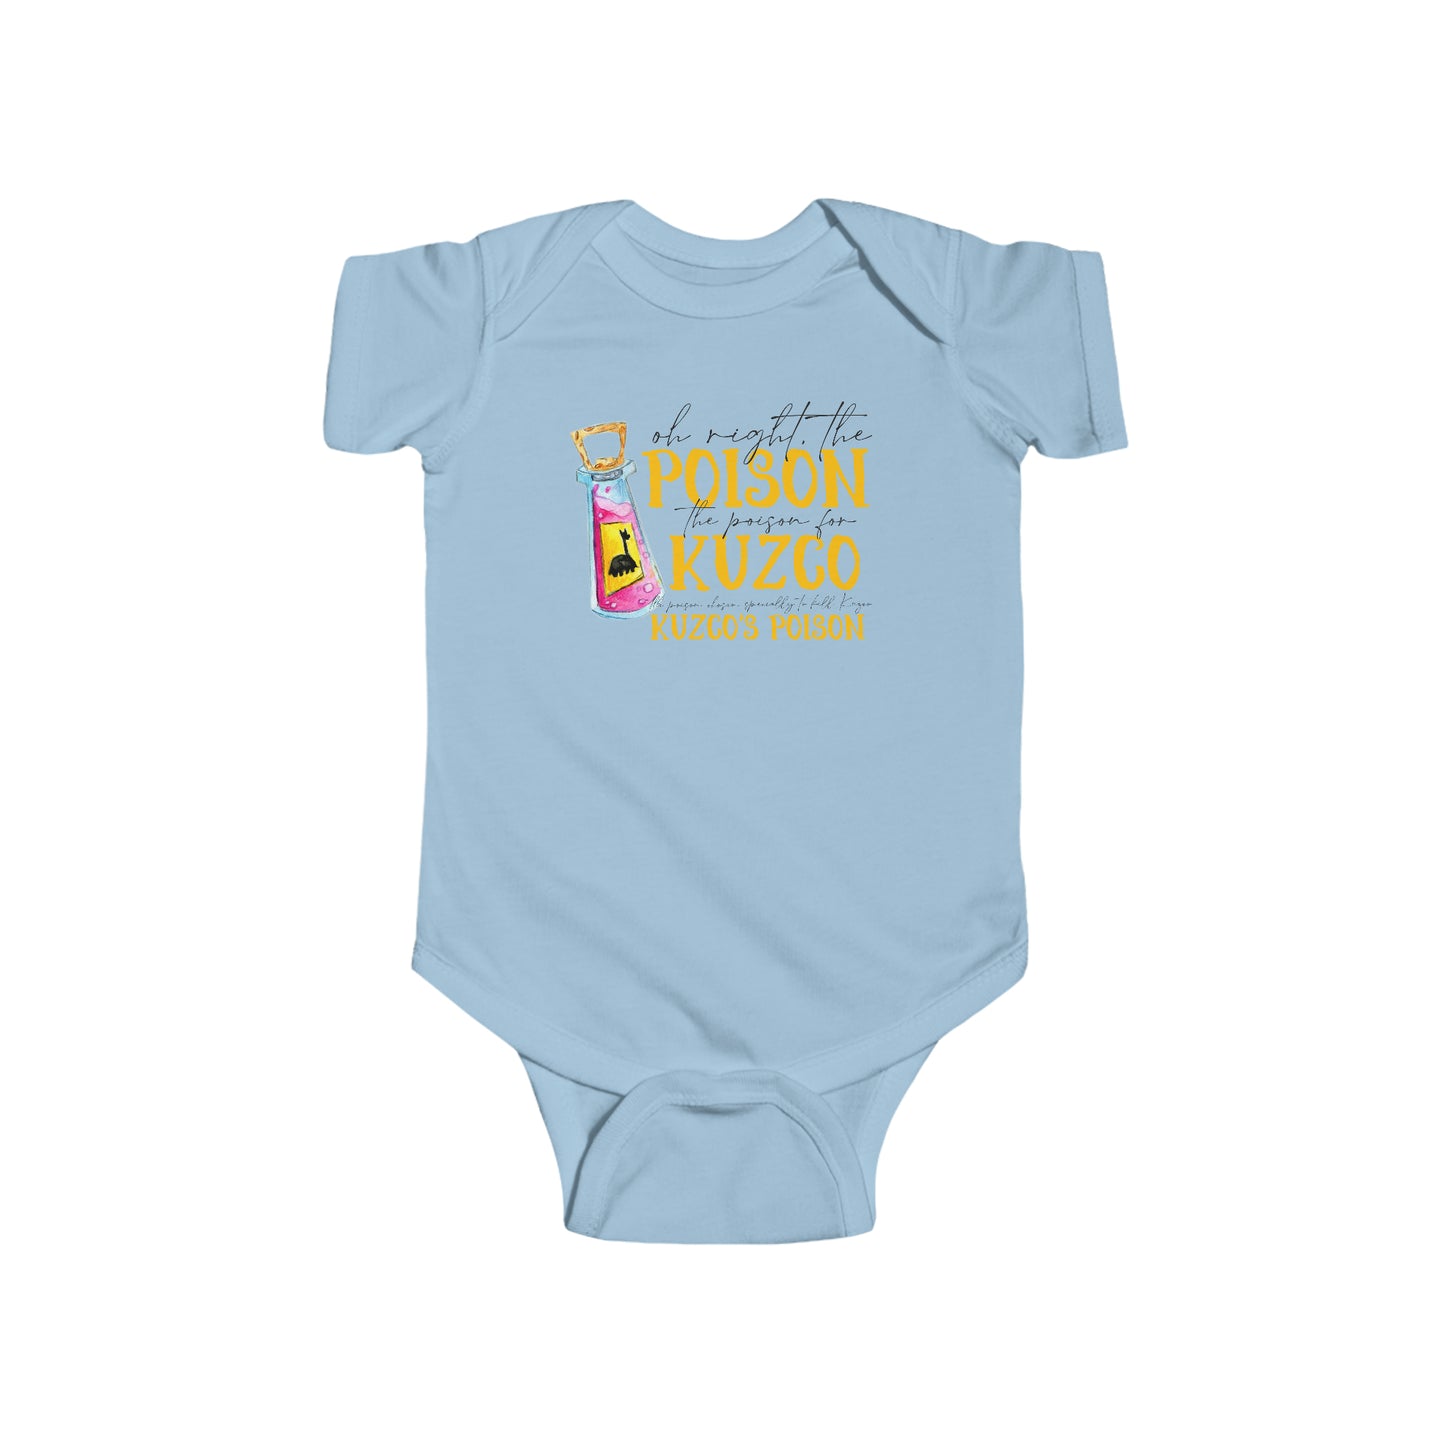 Oh Right The Poison Rabbit Skins Infant Fine Jersey Bodysuit